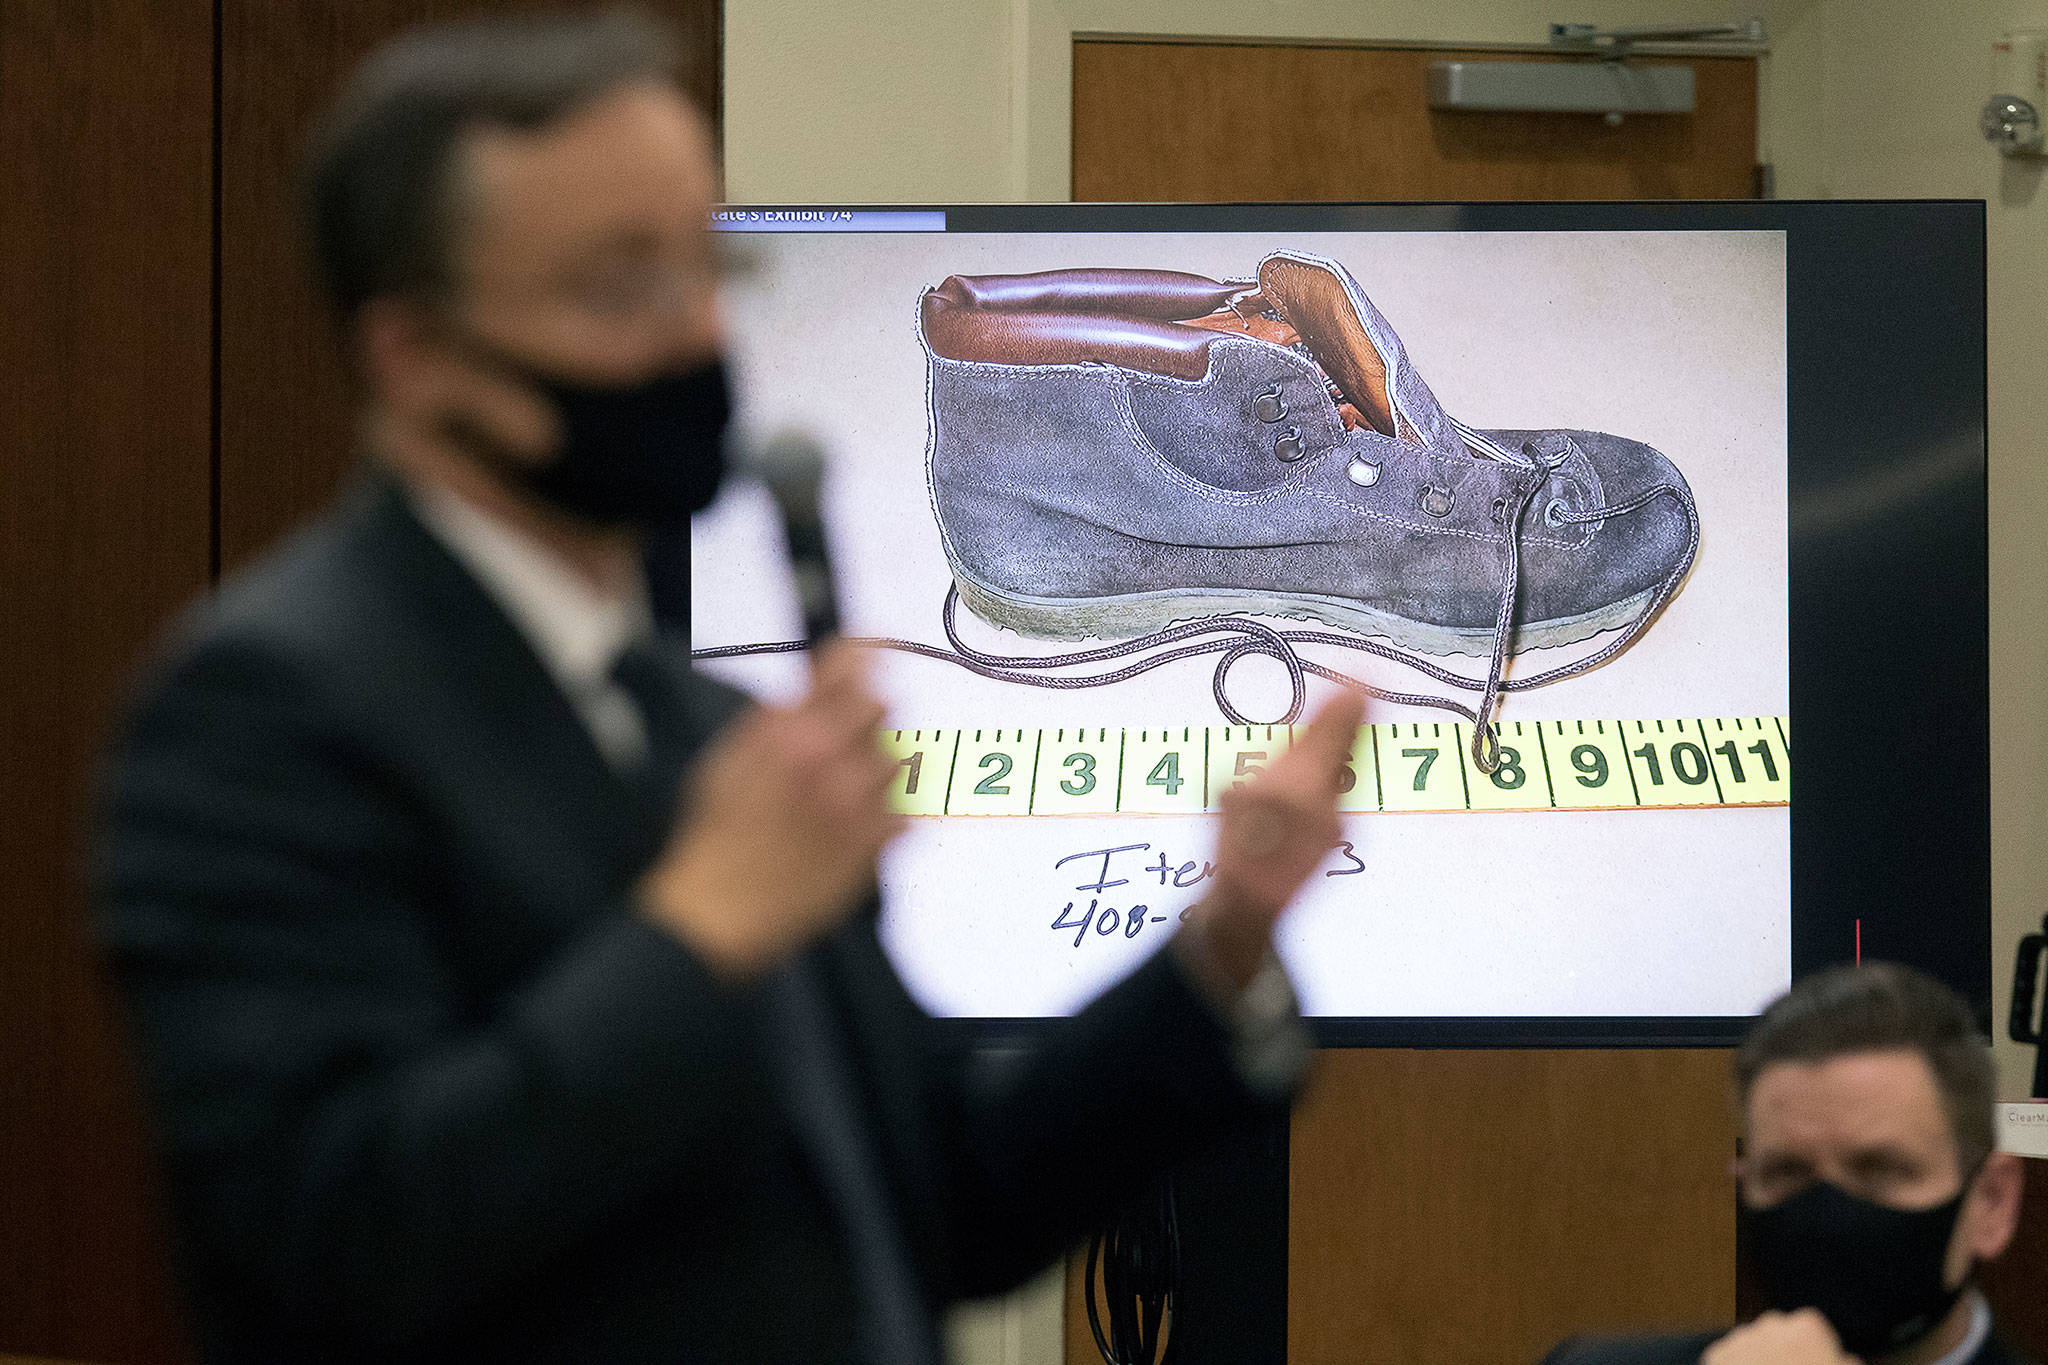 Snohomish County deputy prosecutor Craig Matheson talks about DNA found on a shoe, worn by Jody Loomis, during his opening statement in the murder trial of Terrence Miller at the Snohomish County Courthouse on Monday in Everett. (Andy Bronson / The Herald)